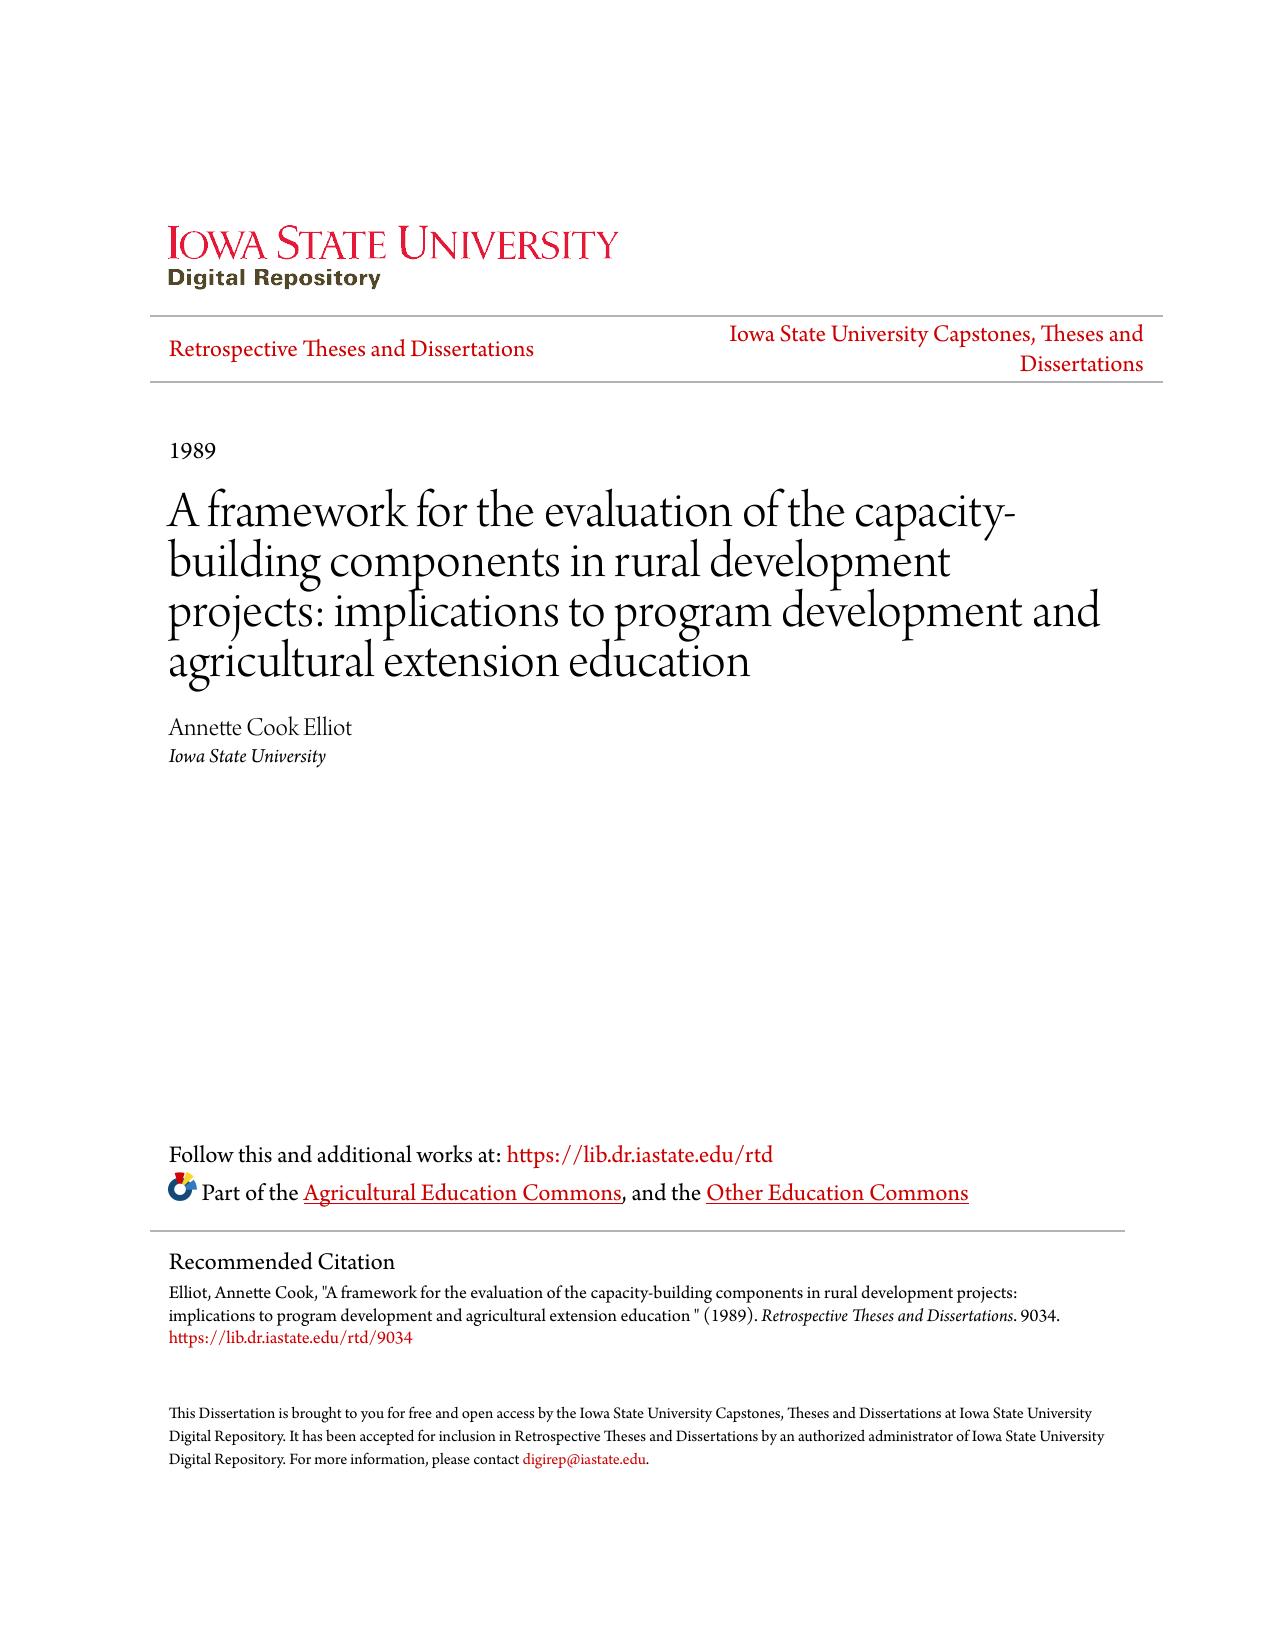 A framework for the evaluation of the capacity-building components in rural development projects: implications to program development and agricultural extension education